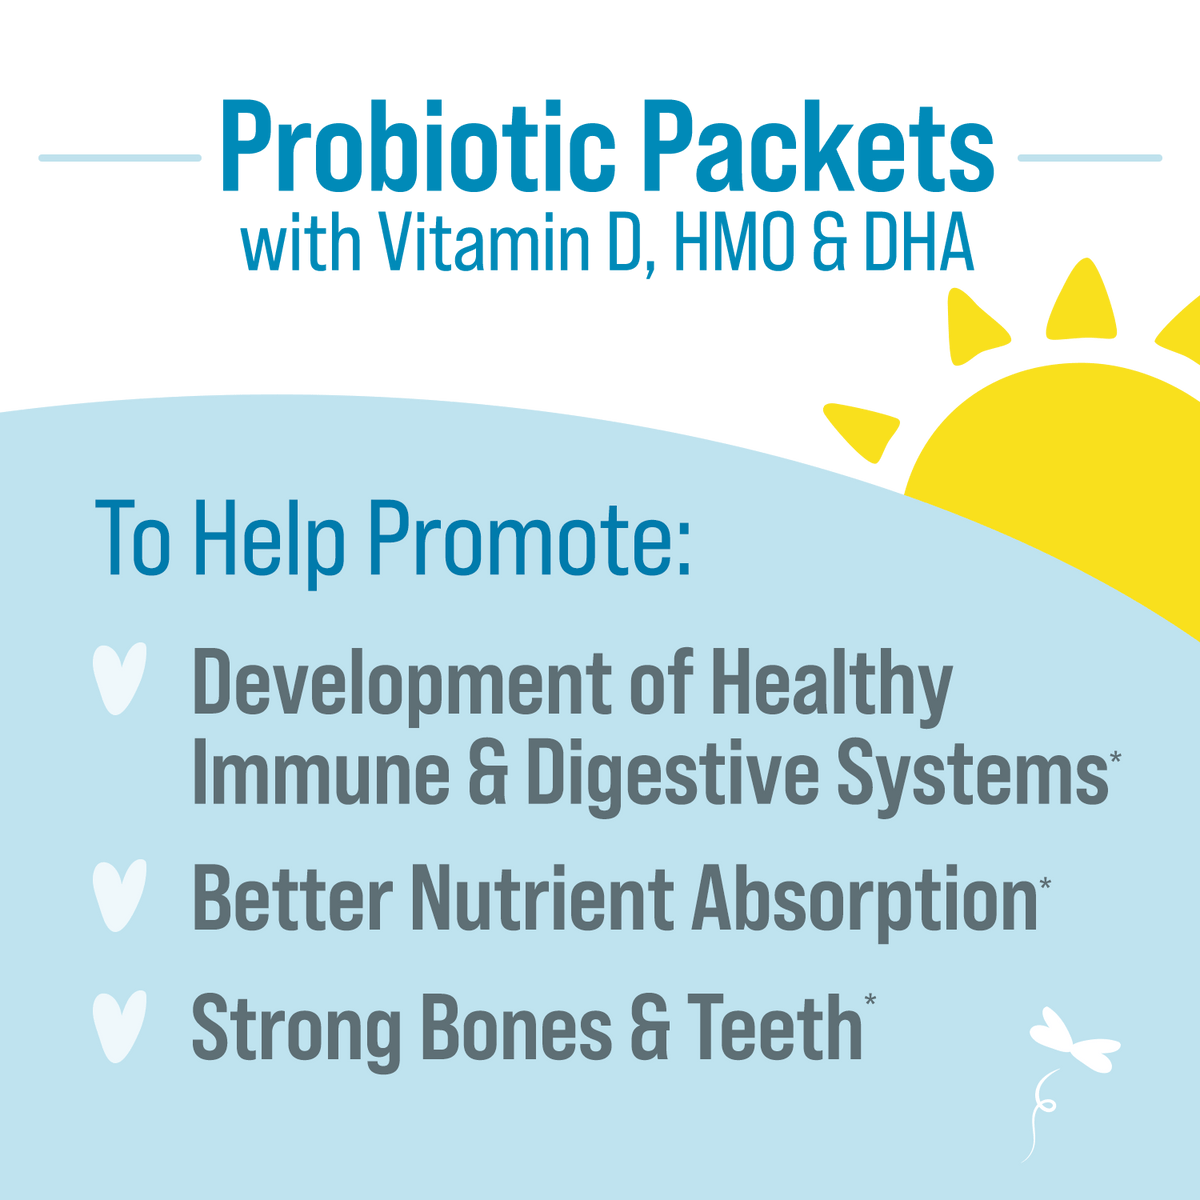 probiotic packets with vitamin D, HMO & DHA. to help promote development of healthy immune & digestive systems, better nutrient absorption, and strong bones & teeth